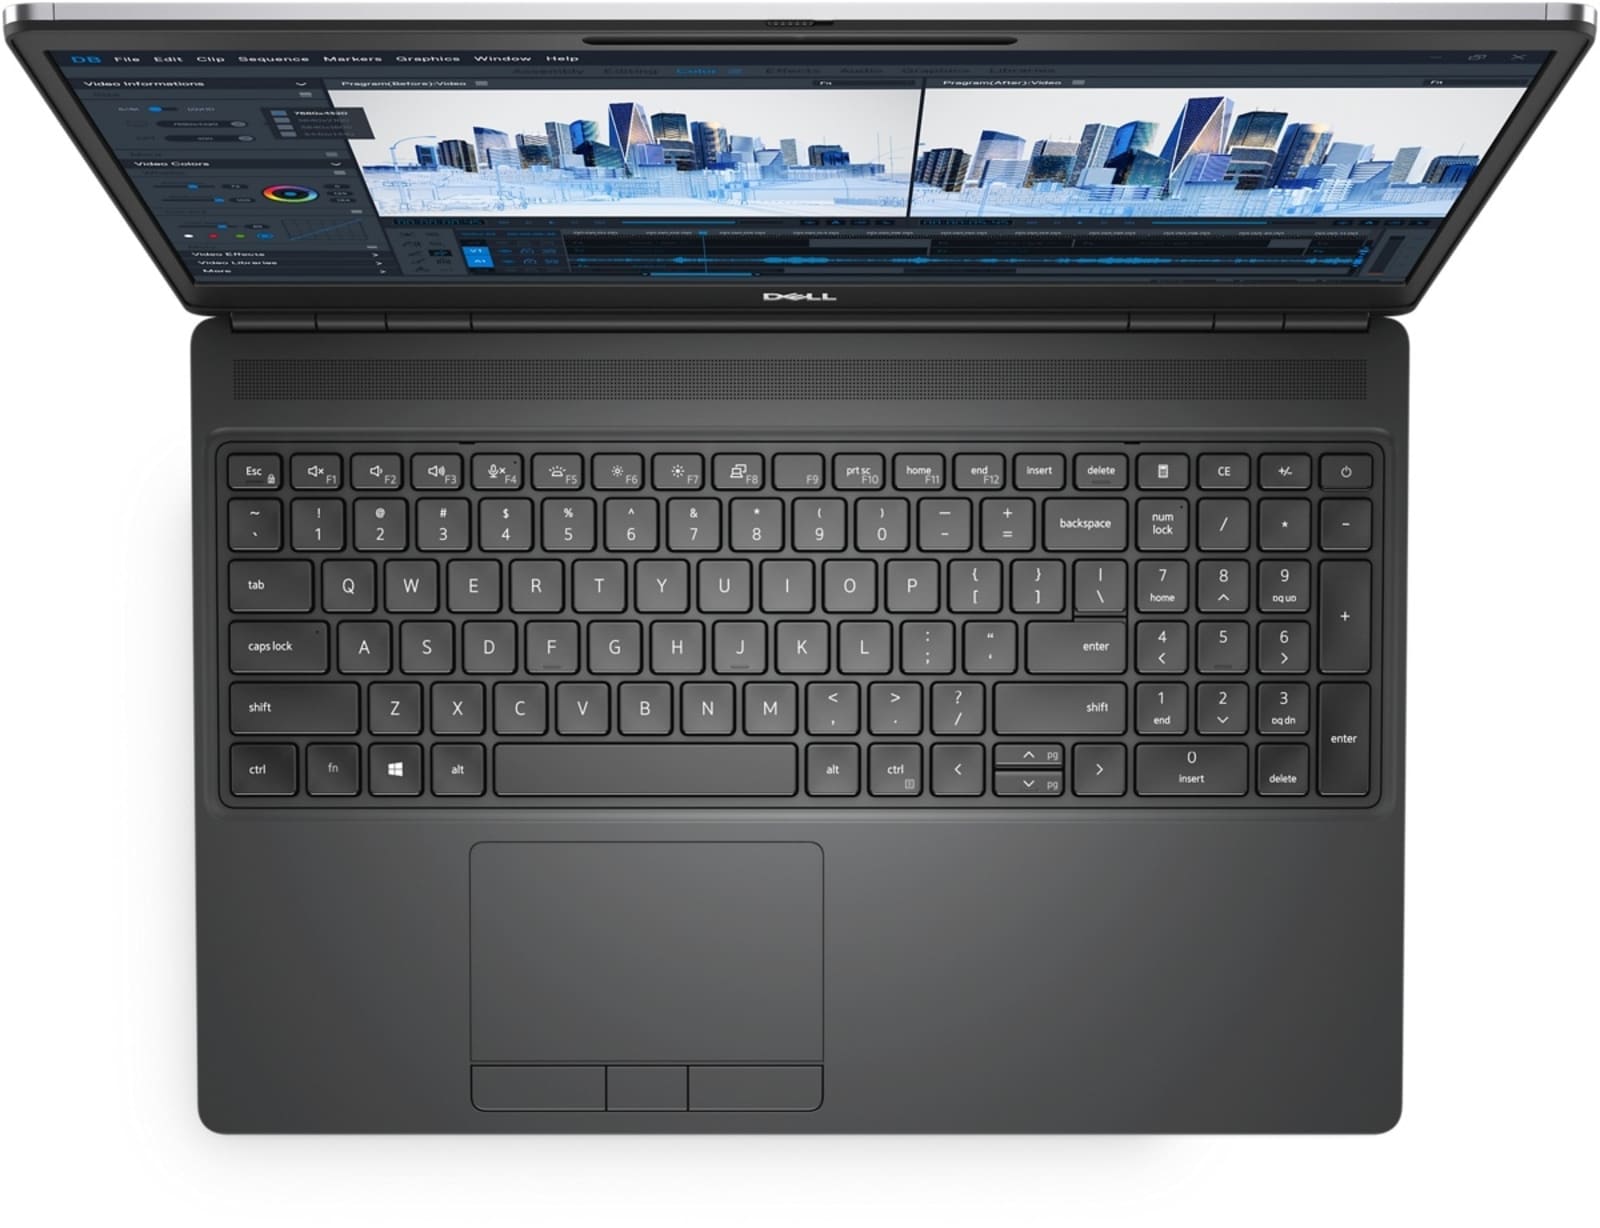 Restored Dell Precision 7000 7560 Workstation Laptop (2021) | 15.6" FHD Touch | Core i5 - 256GB SSD + 256GB SSD - 8GB RAM | 6 Cores @ 4.6 GHz - 11th Gen CPU (Refurbished) - image 5 of 11